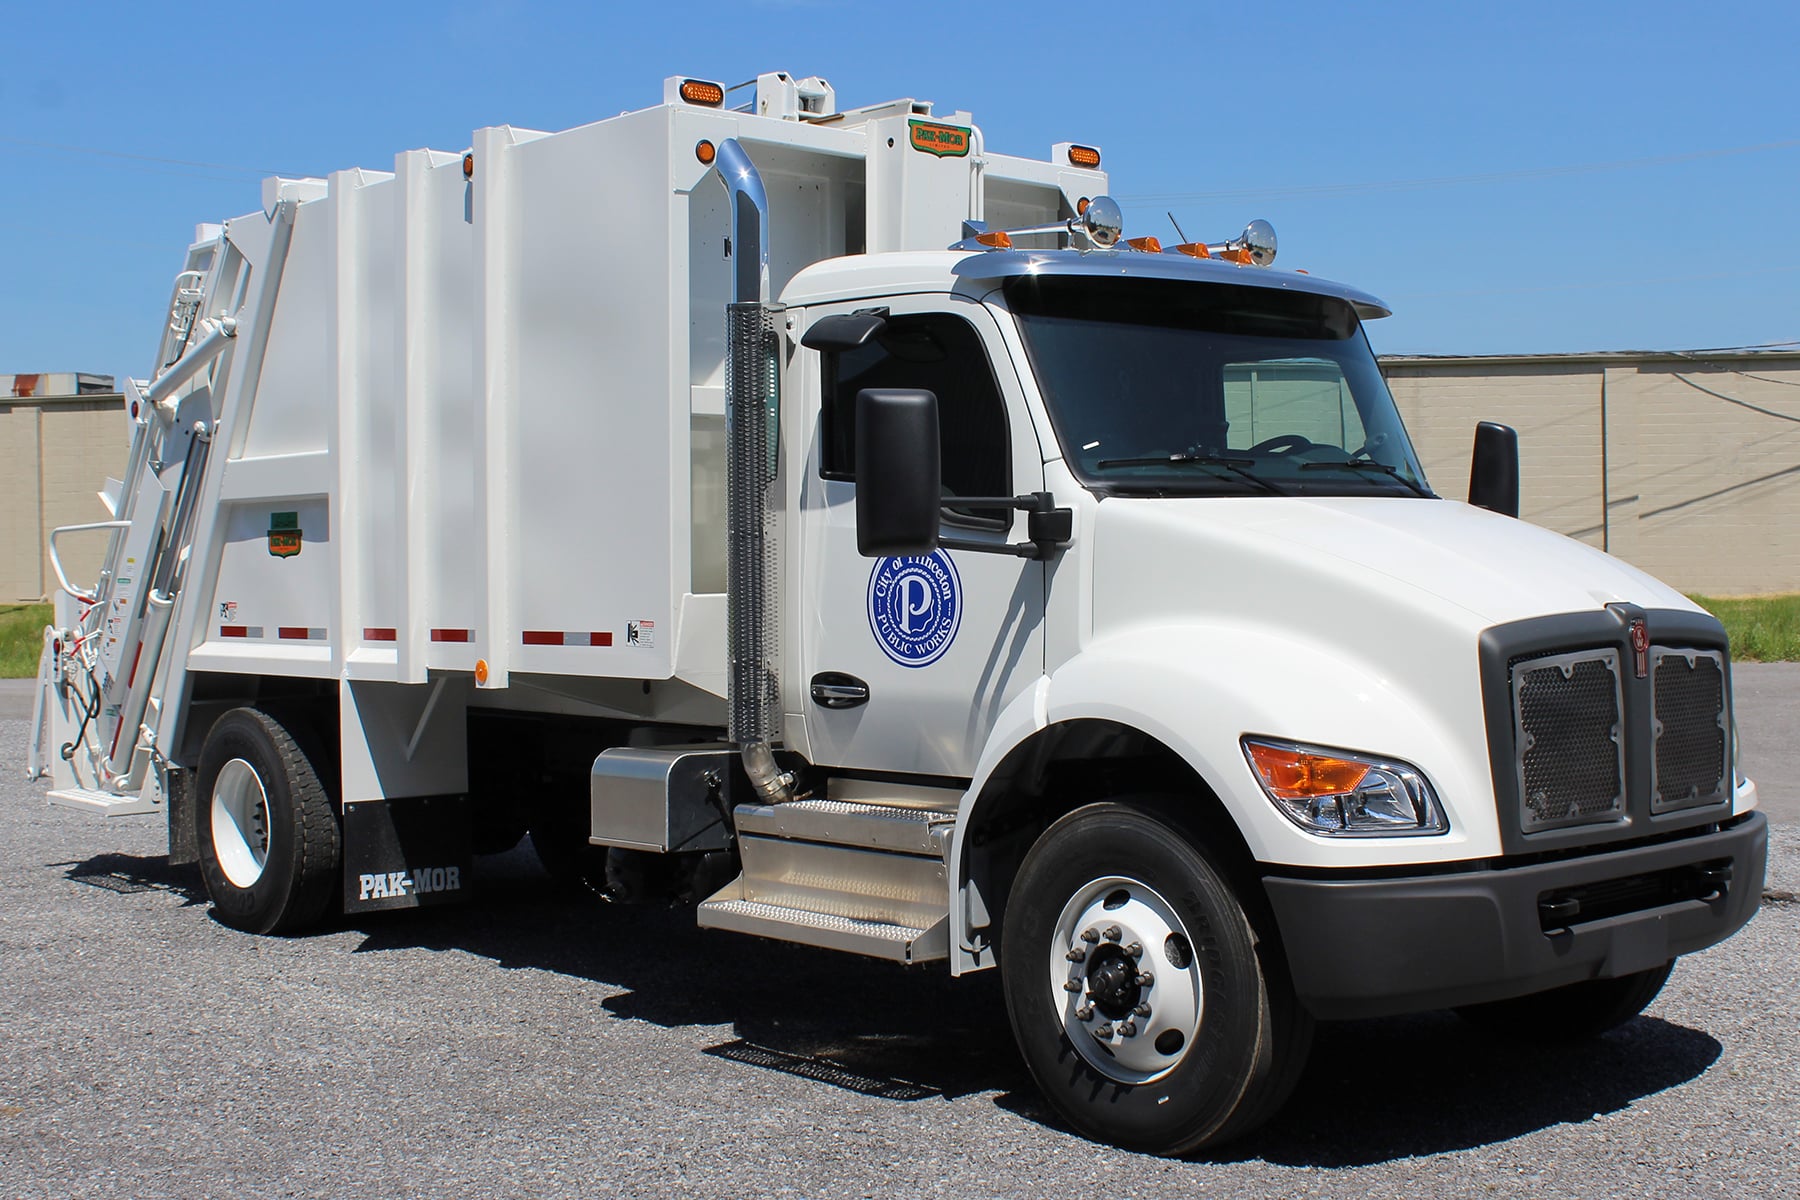 A new white City of Princeton garbage collection truck with City of Princeton Public Works insignia on the door.